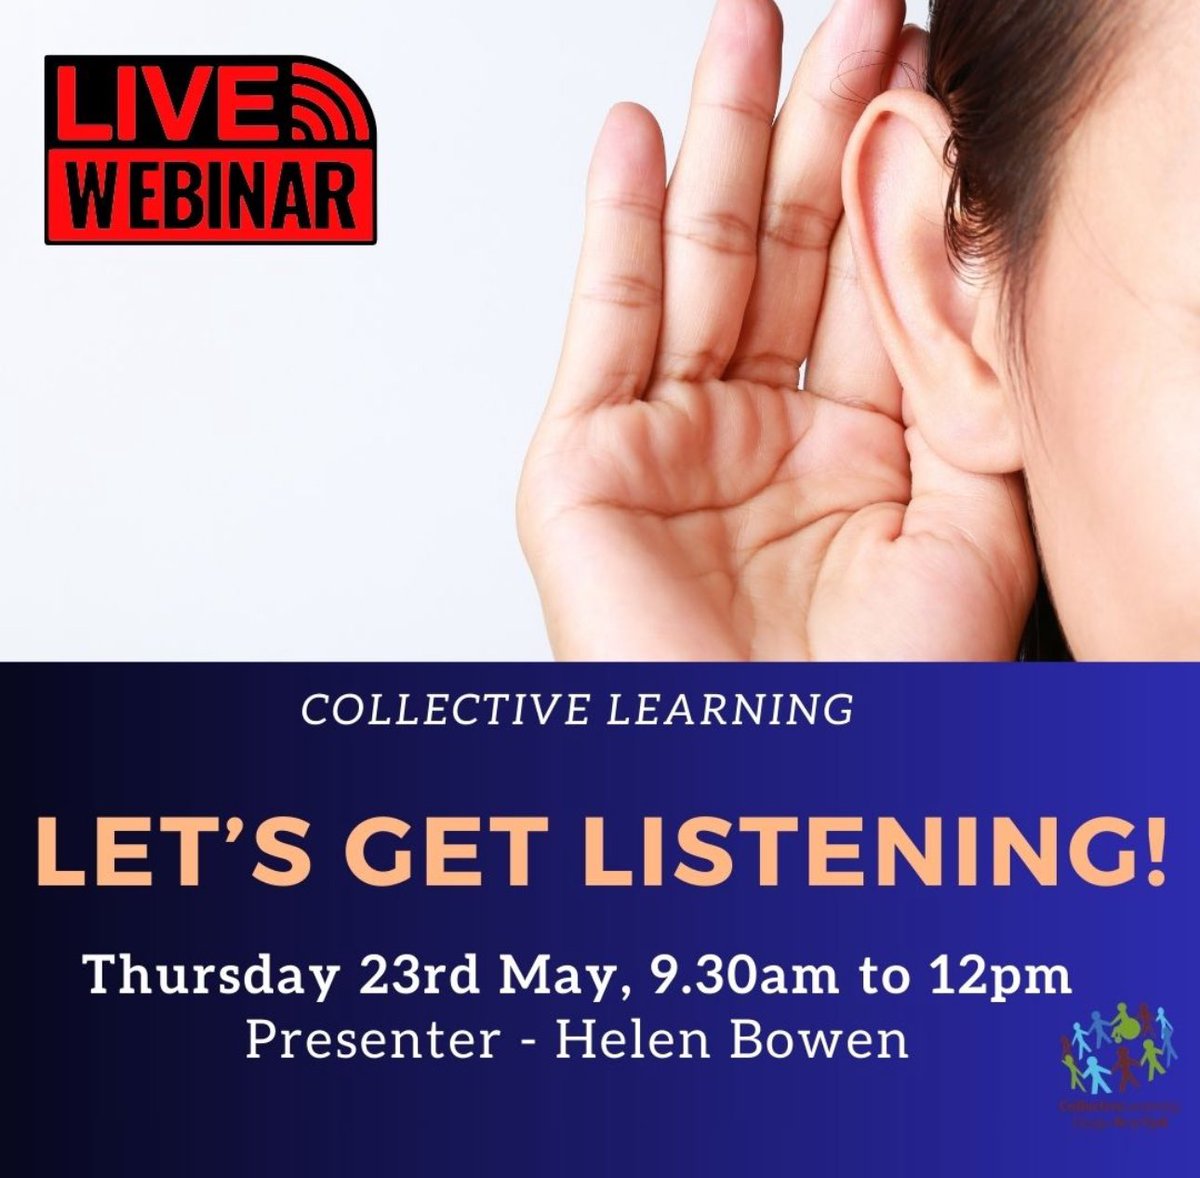 LIVE WEBINAR with @helenbowen1 - 'Let's Get Listening' 
Thursday 23rd May - 9.30am to 12pm 
Contact us for booking 👍

#webinar #primaryeducation #primaryschool #listening